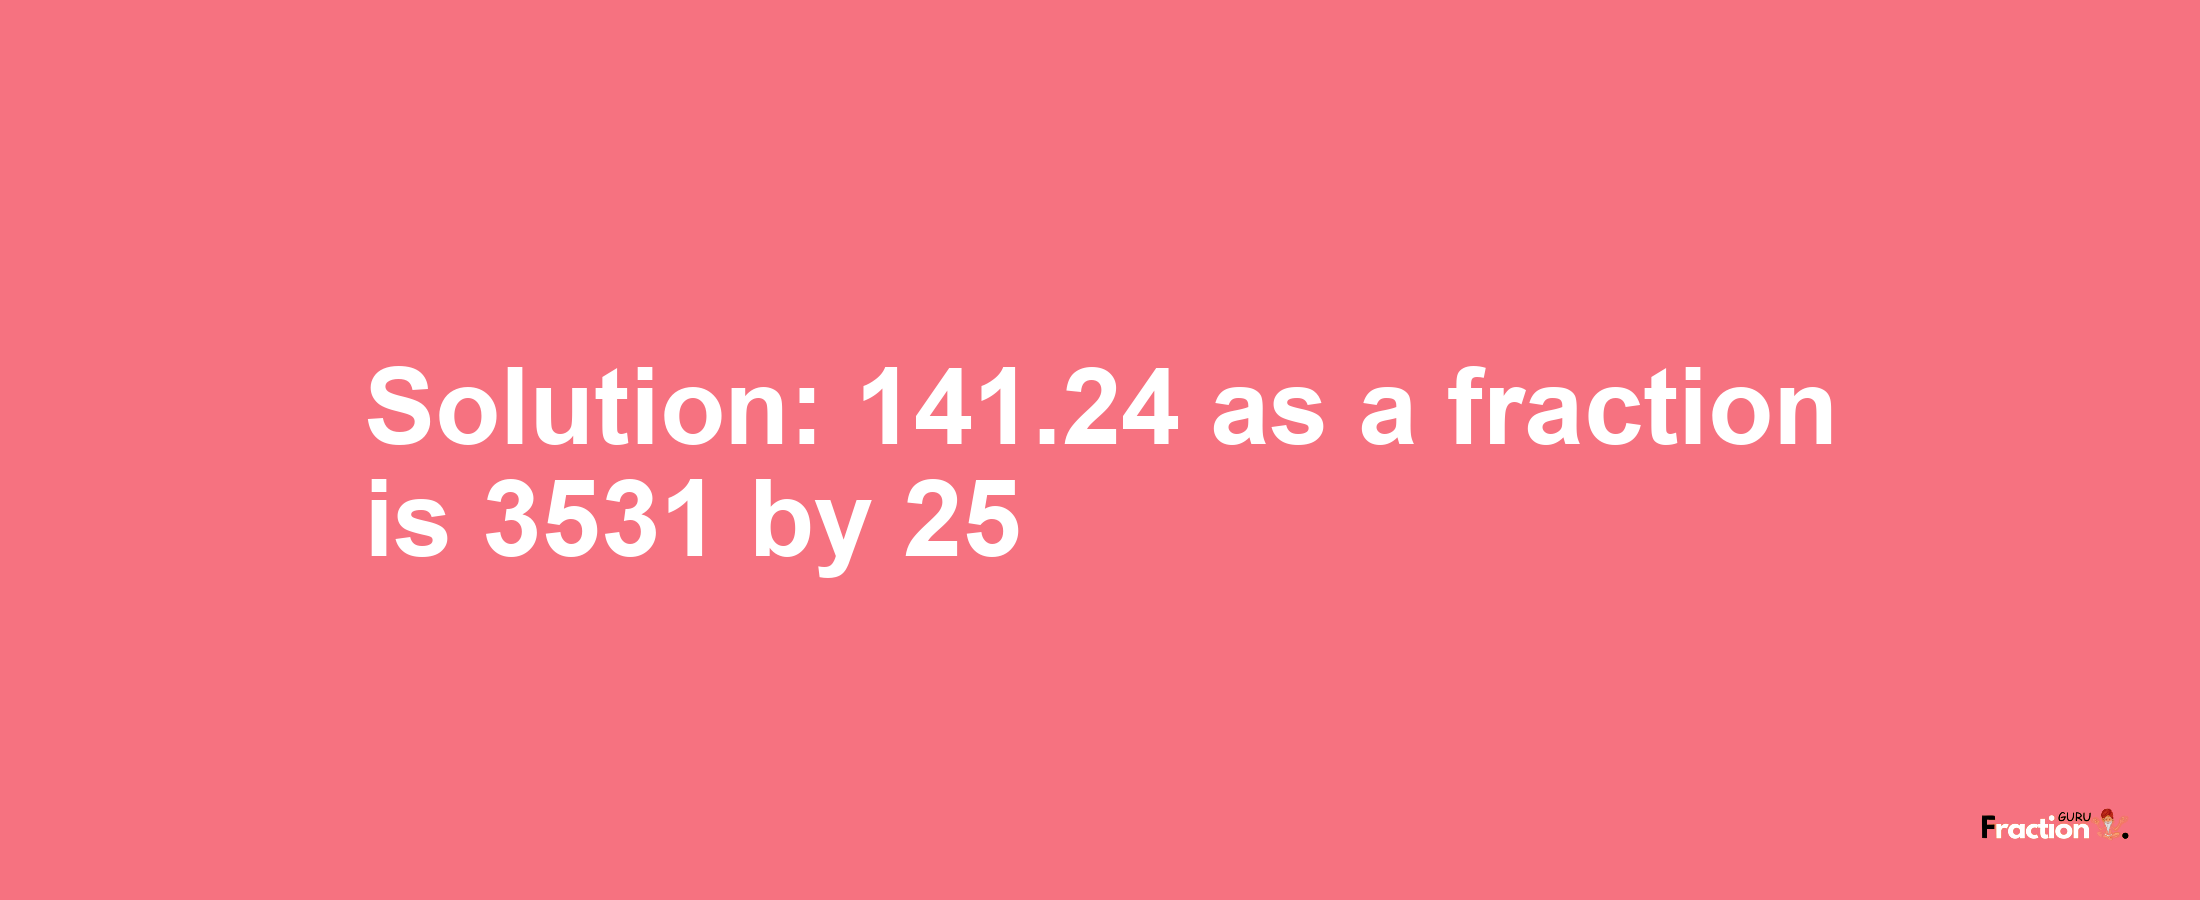 Solution:141.24 as a fraction is 3531/25